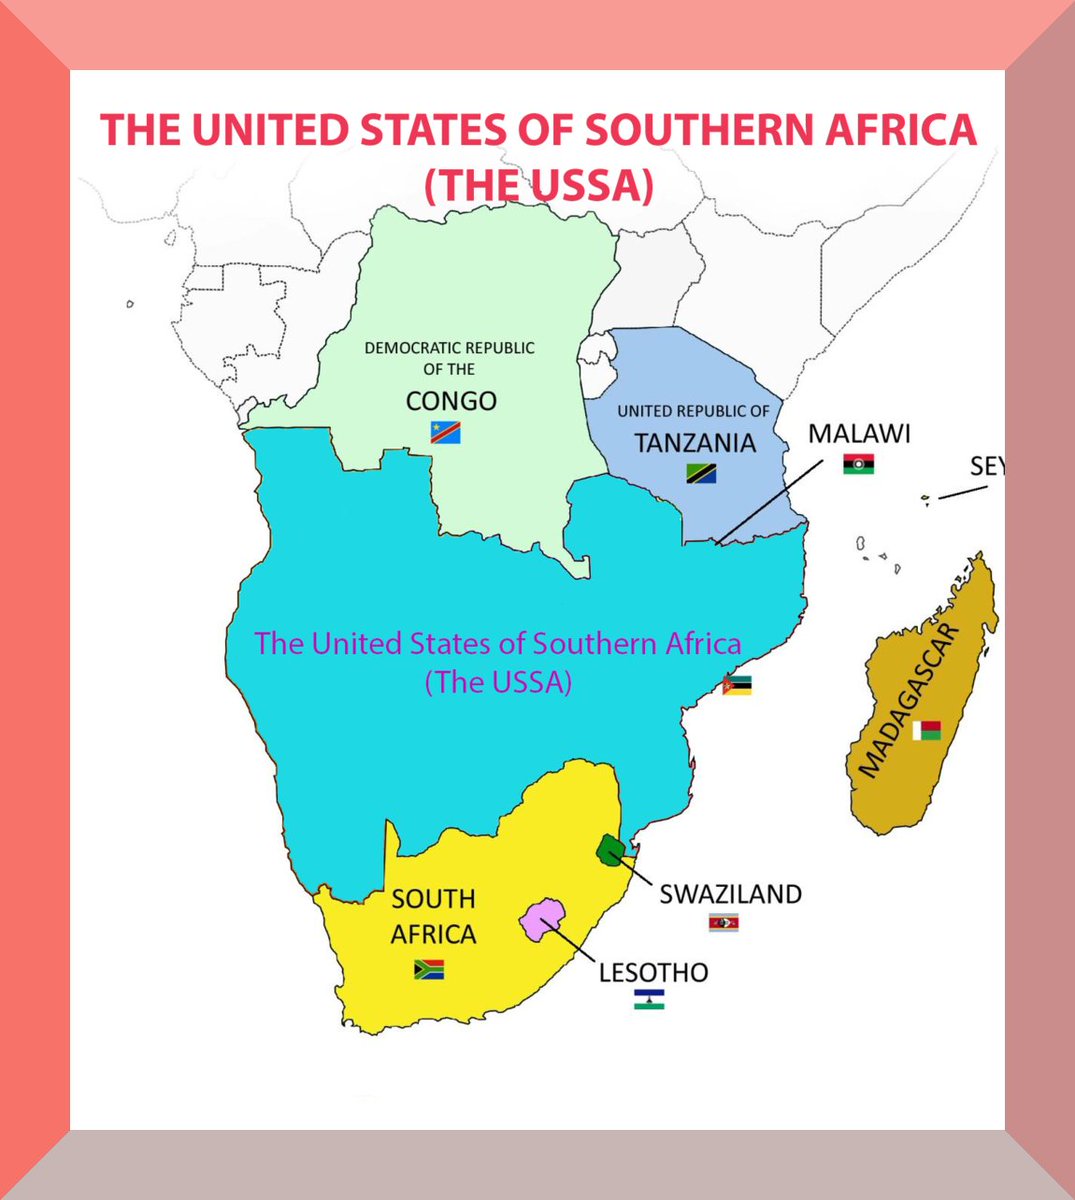 A REINTRODUCTION OF THE UNITED STATES OF SOUTHERN AFRICA (THE USSA),  A POTENTIAL SUPERPOWER IN AFRICA

I am fully aware of the United States' Wolfowitz Doctrine which guides US political and military elites to actively seek to prevent the rise of any other global superpower and…